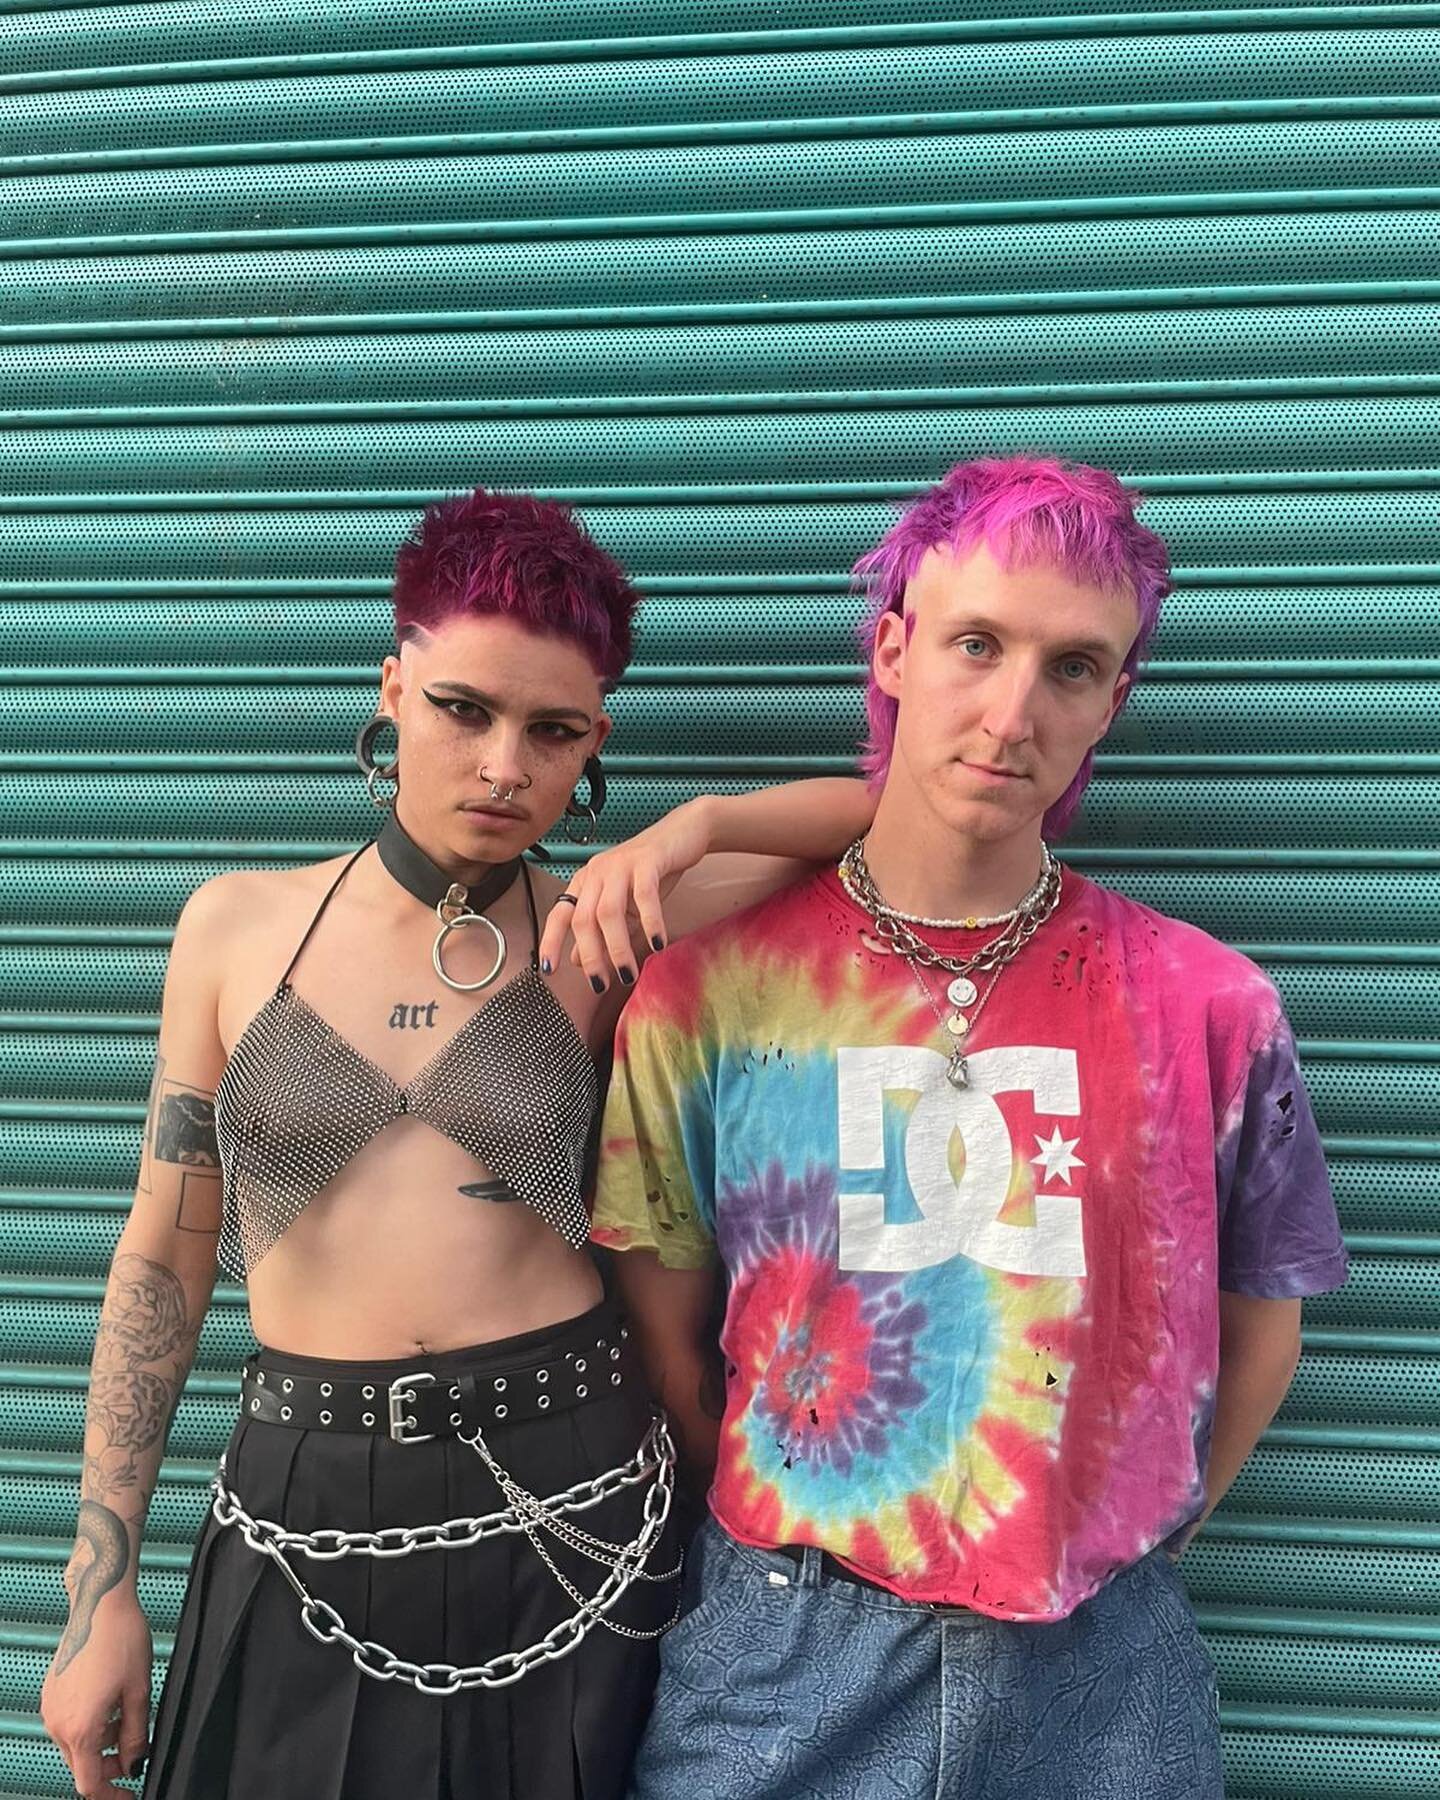 #pride lewks part 2 😛
Pink pixie crop and fade by @txmhair 🧞&zwj;♀️
Purple mullet with heart detail by @__louisewakeling_ 💓💜
Have a fabulous Pride weekend 😻